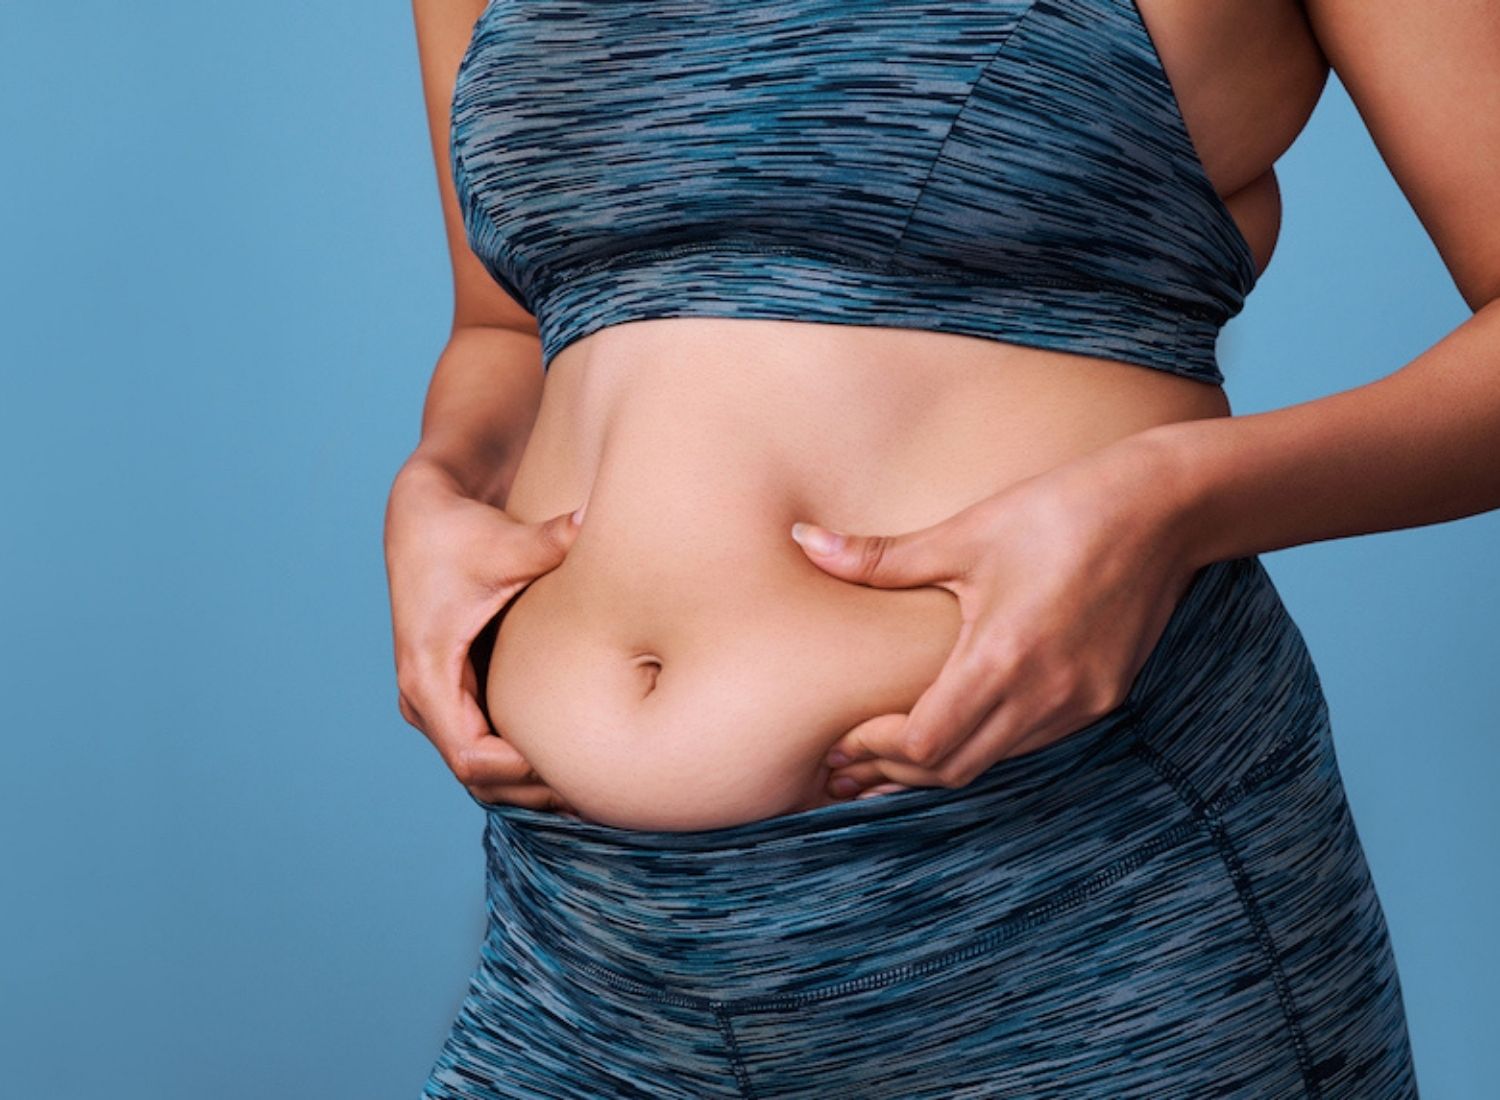 8 Foods That Help You Get Rid Of Belly Fat